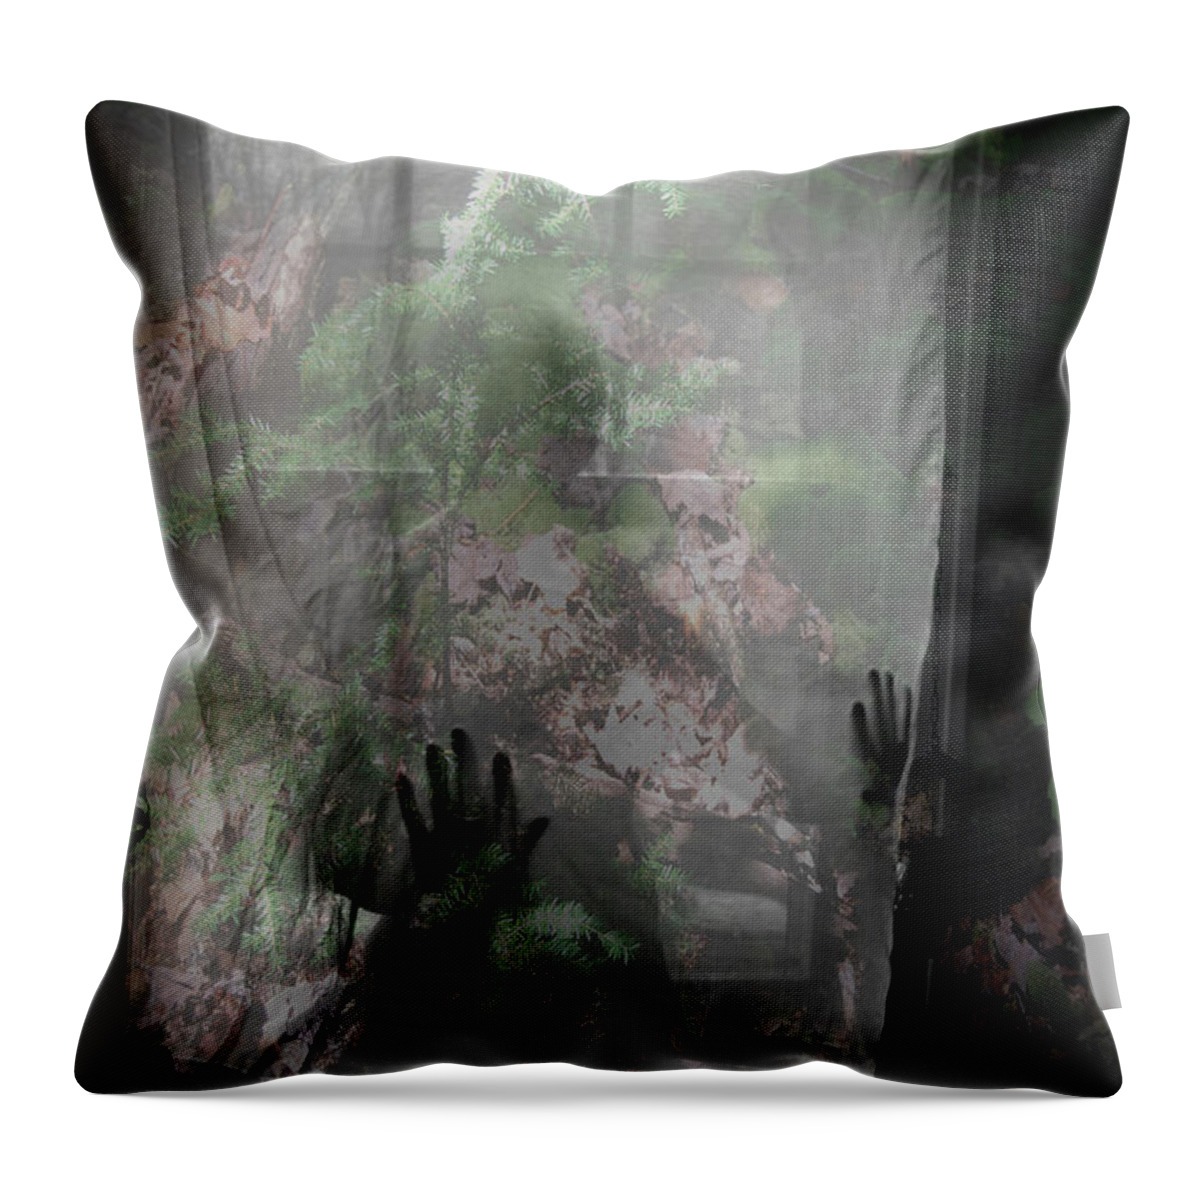 Nudes Throw Pillow featuring the photograph Window Wonder #2 by Trish Hale